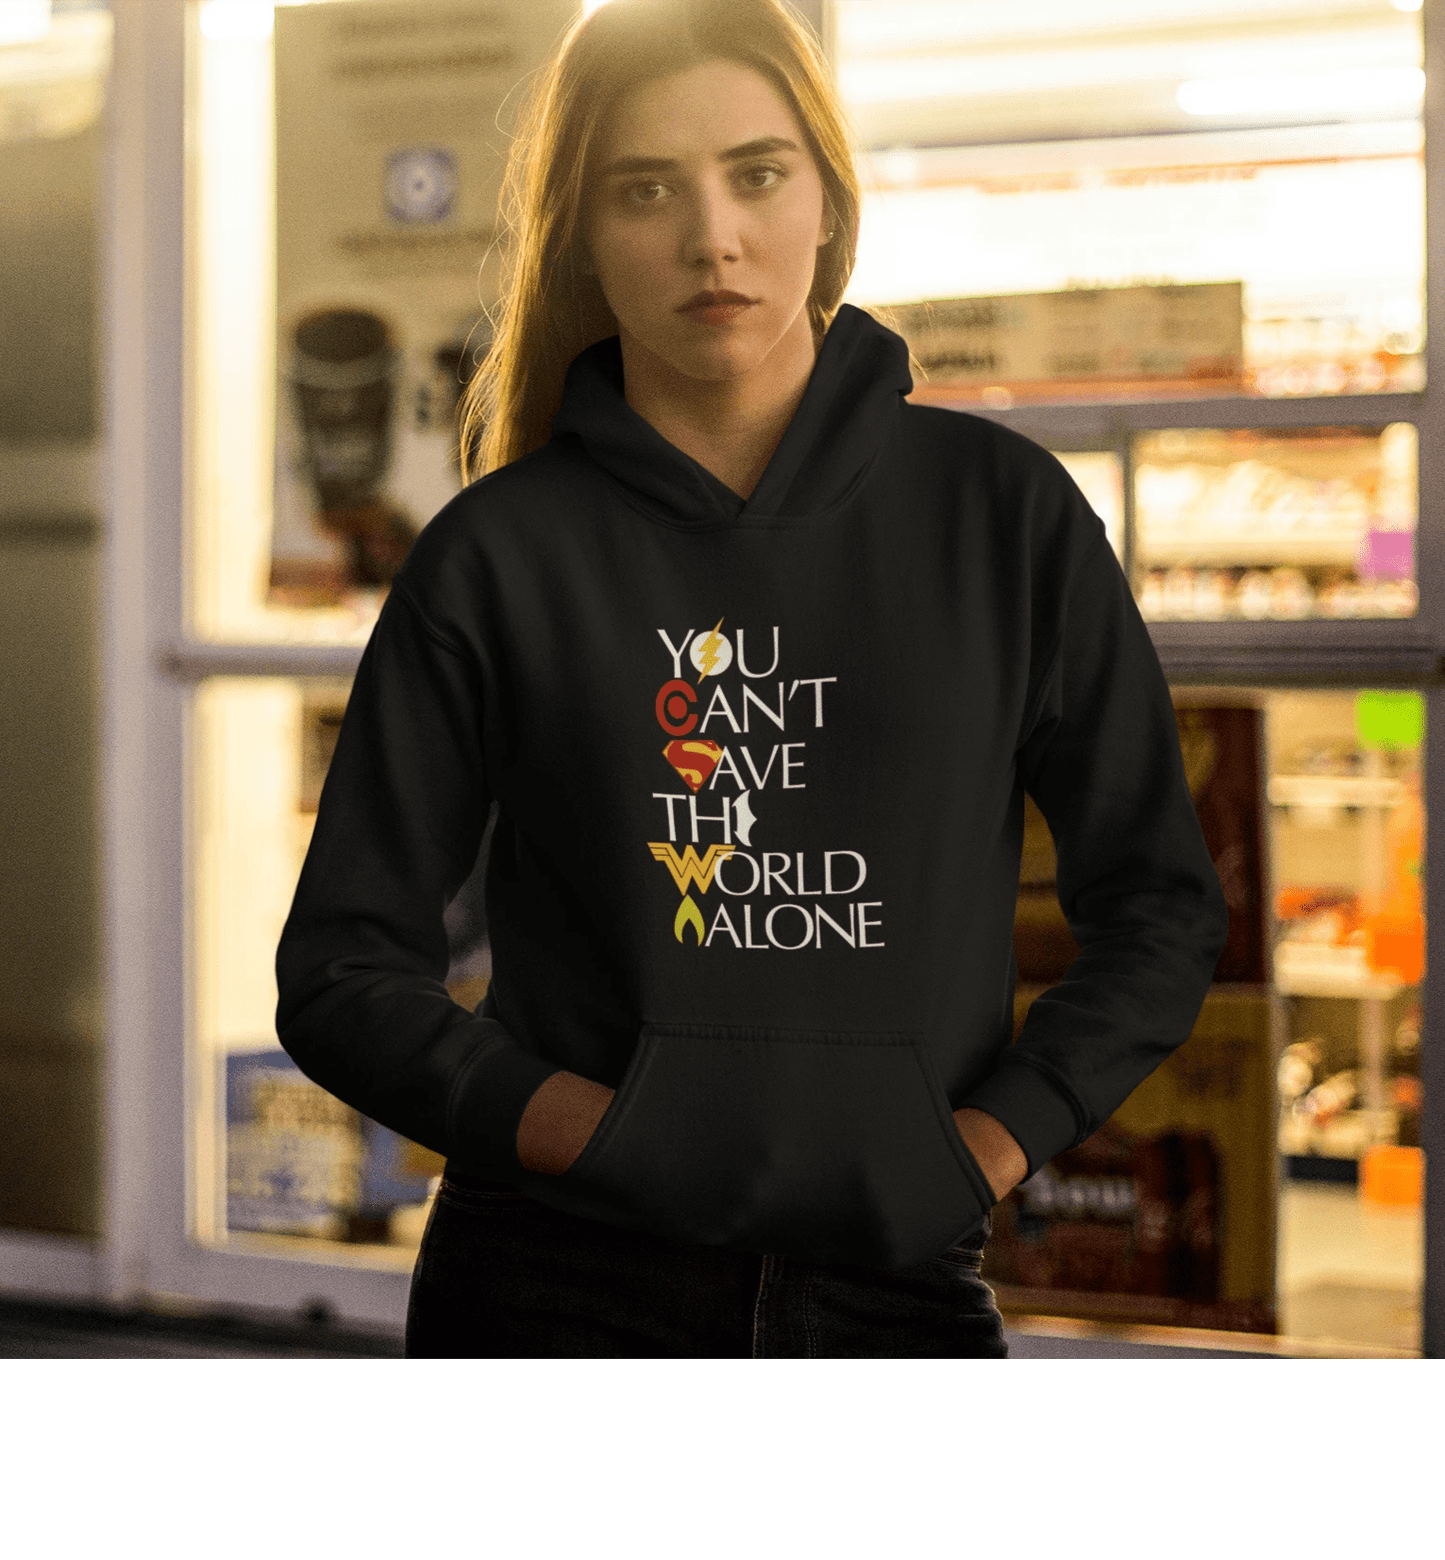 YOU CAN'T SAVE THE WORLD ALONE - WINTER HOODIES BLACK